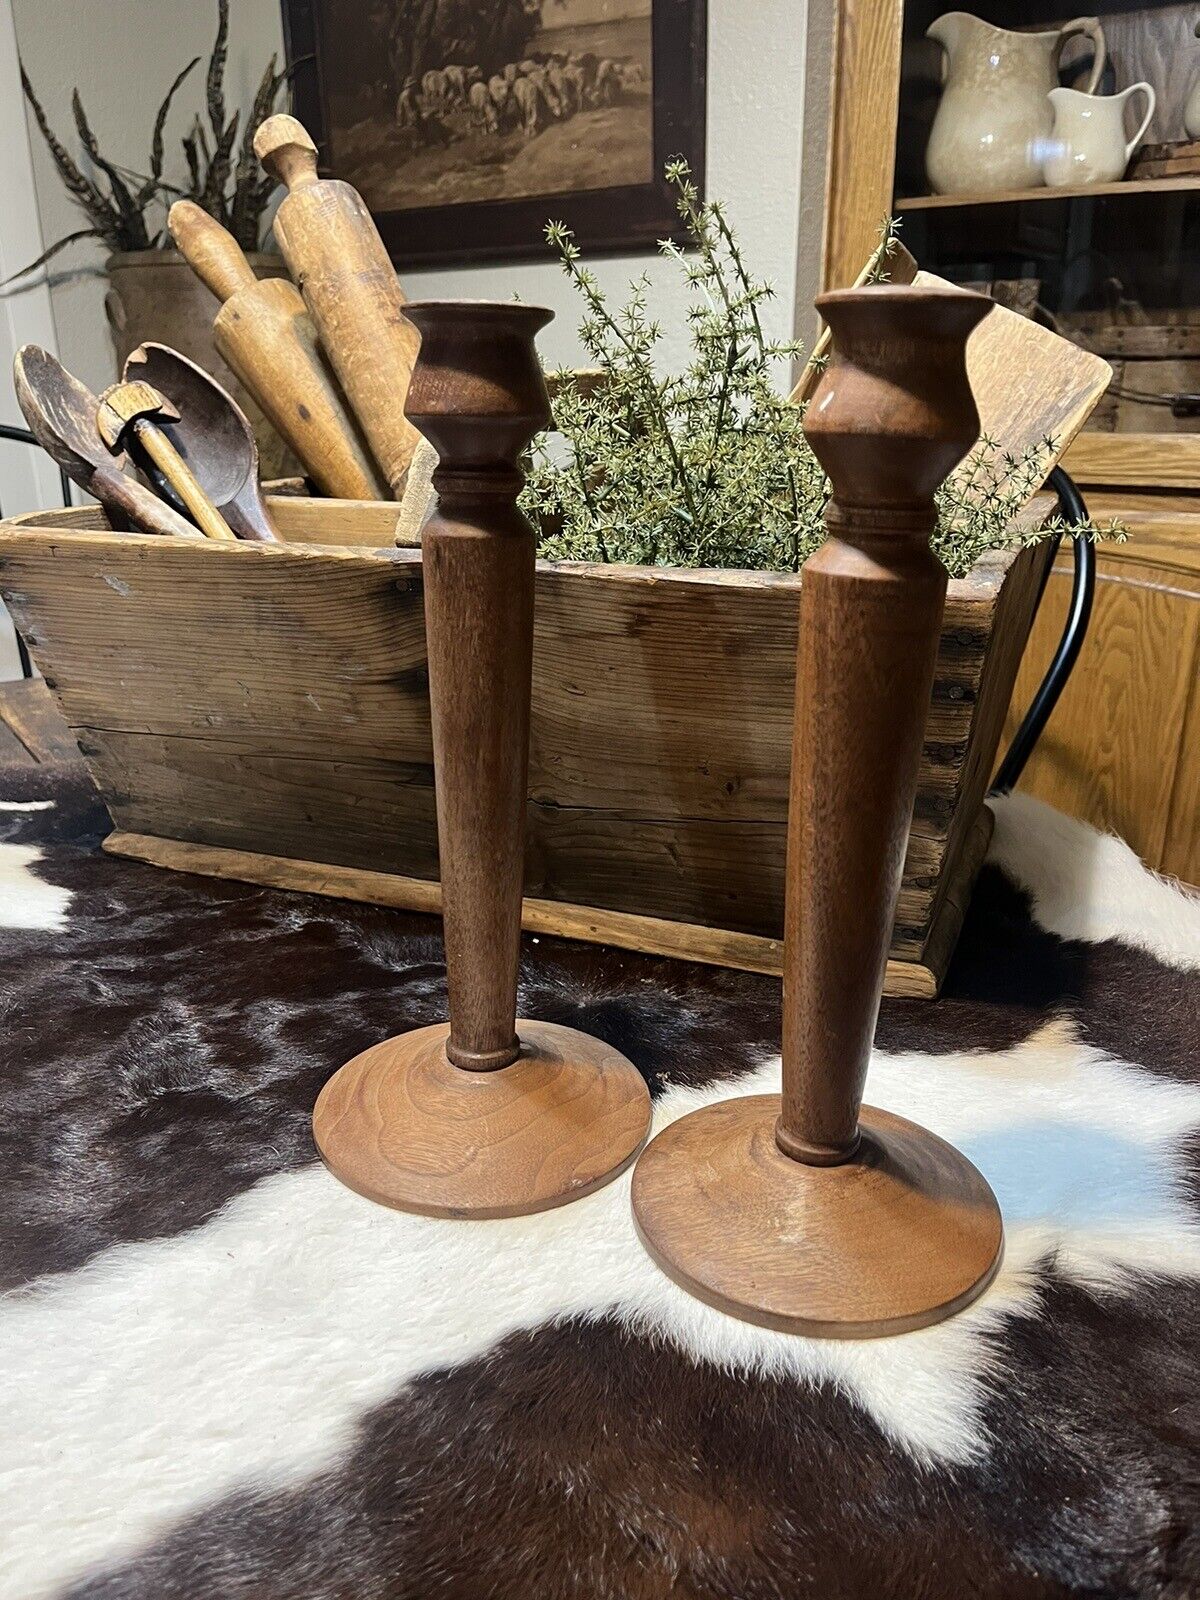 Early Antique PR Arts Craft Wooden Candlesticks Turned Wood Taper Candle Old